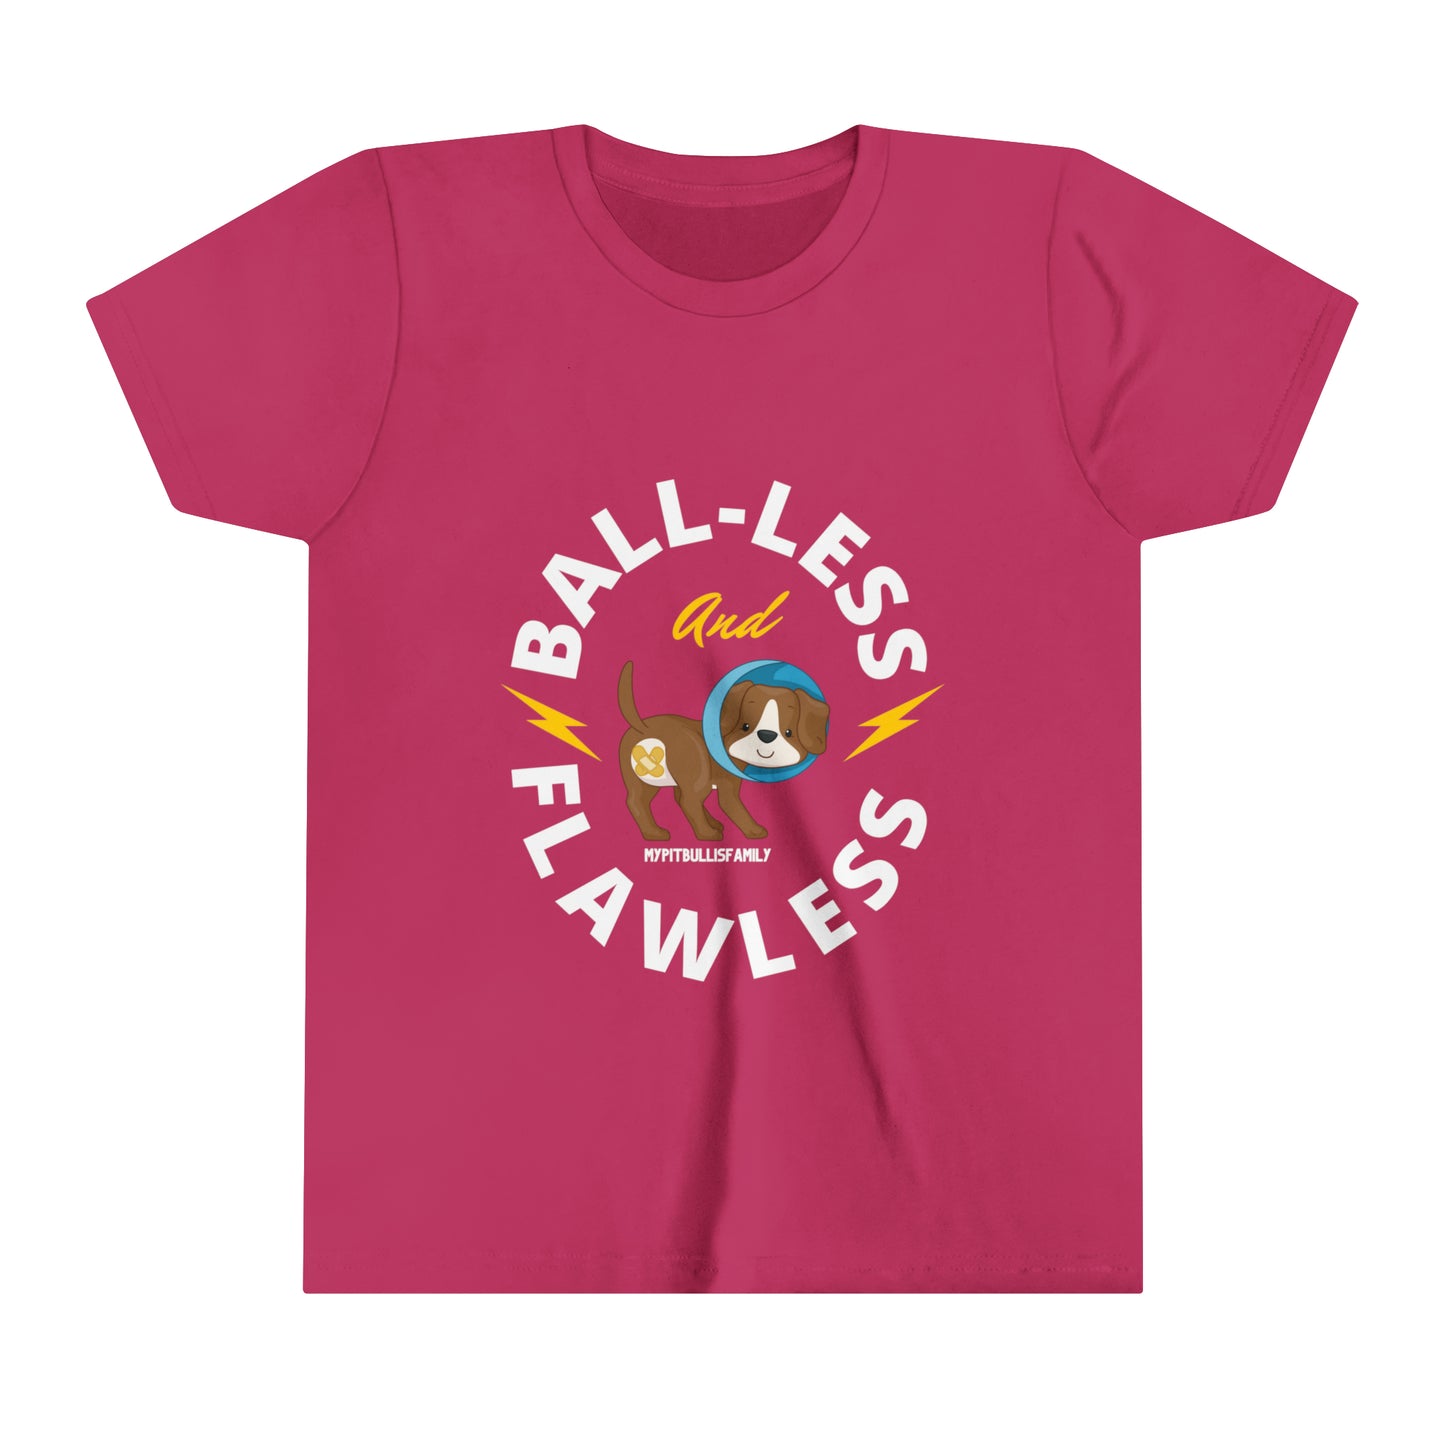 Ball-less & Flawless Youth Short Sleeve Tee